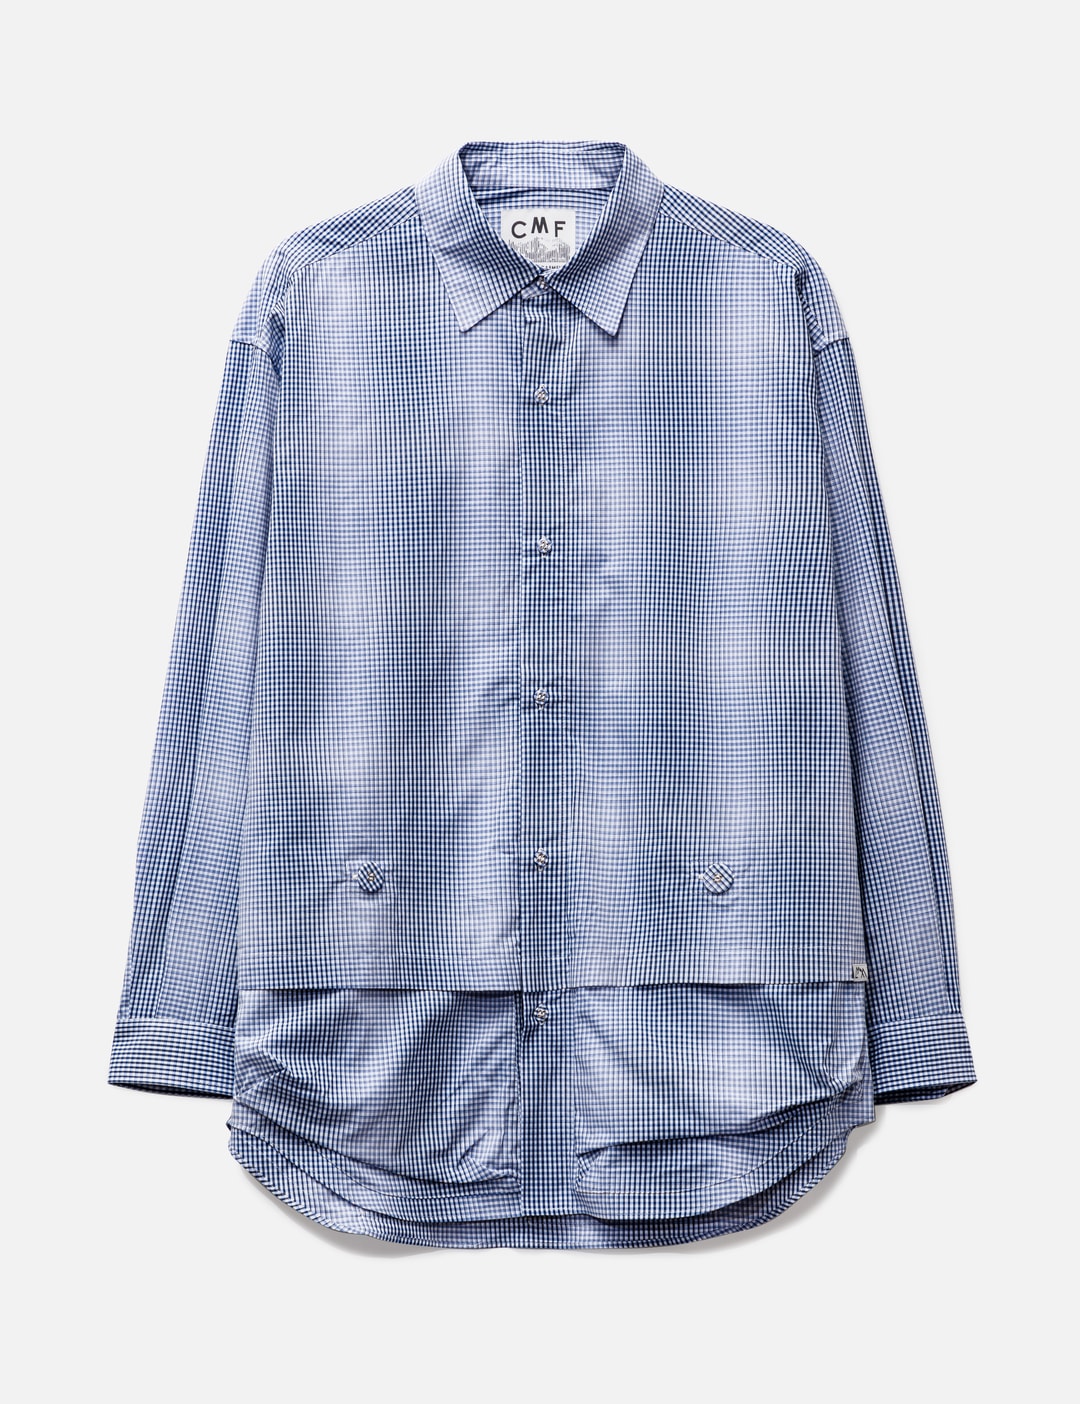 Comfy Outdoor Garment - NEWSPAPER SHIRTS | HBX - Globally Curated ...